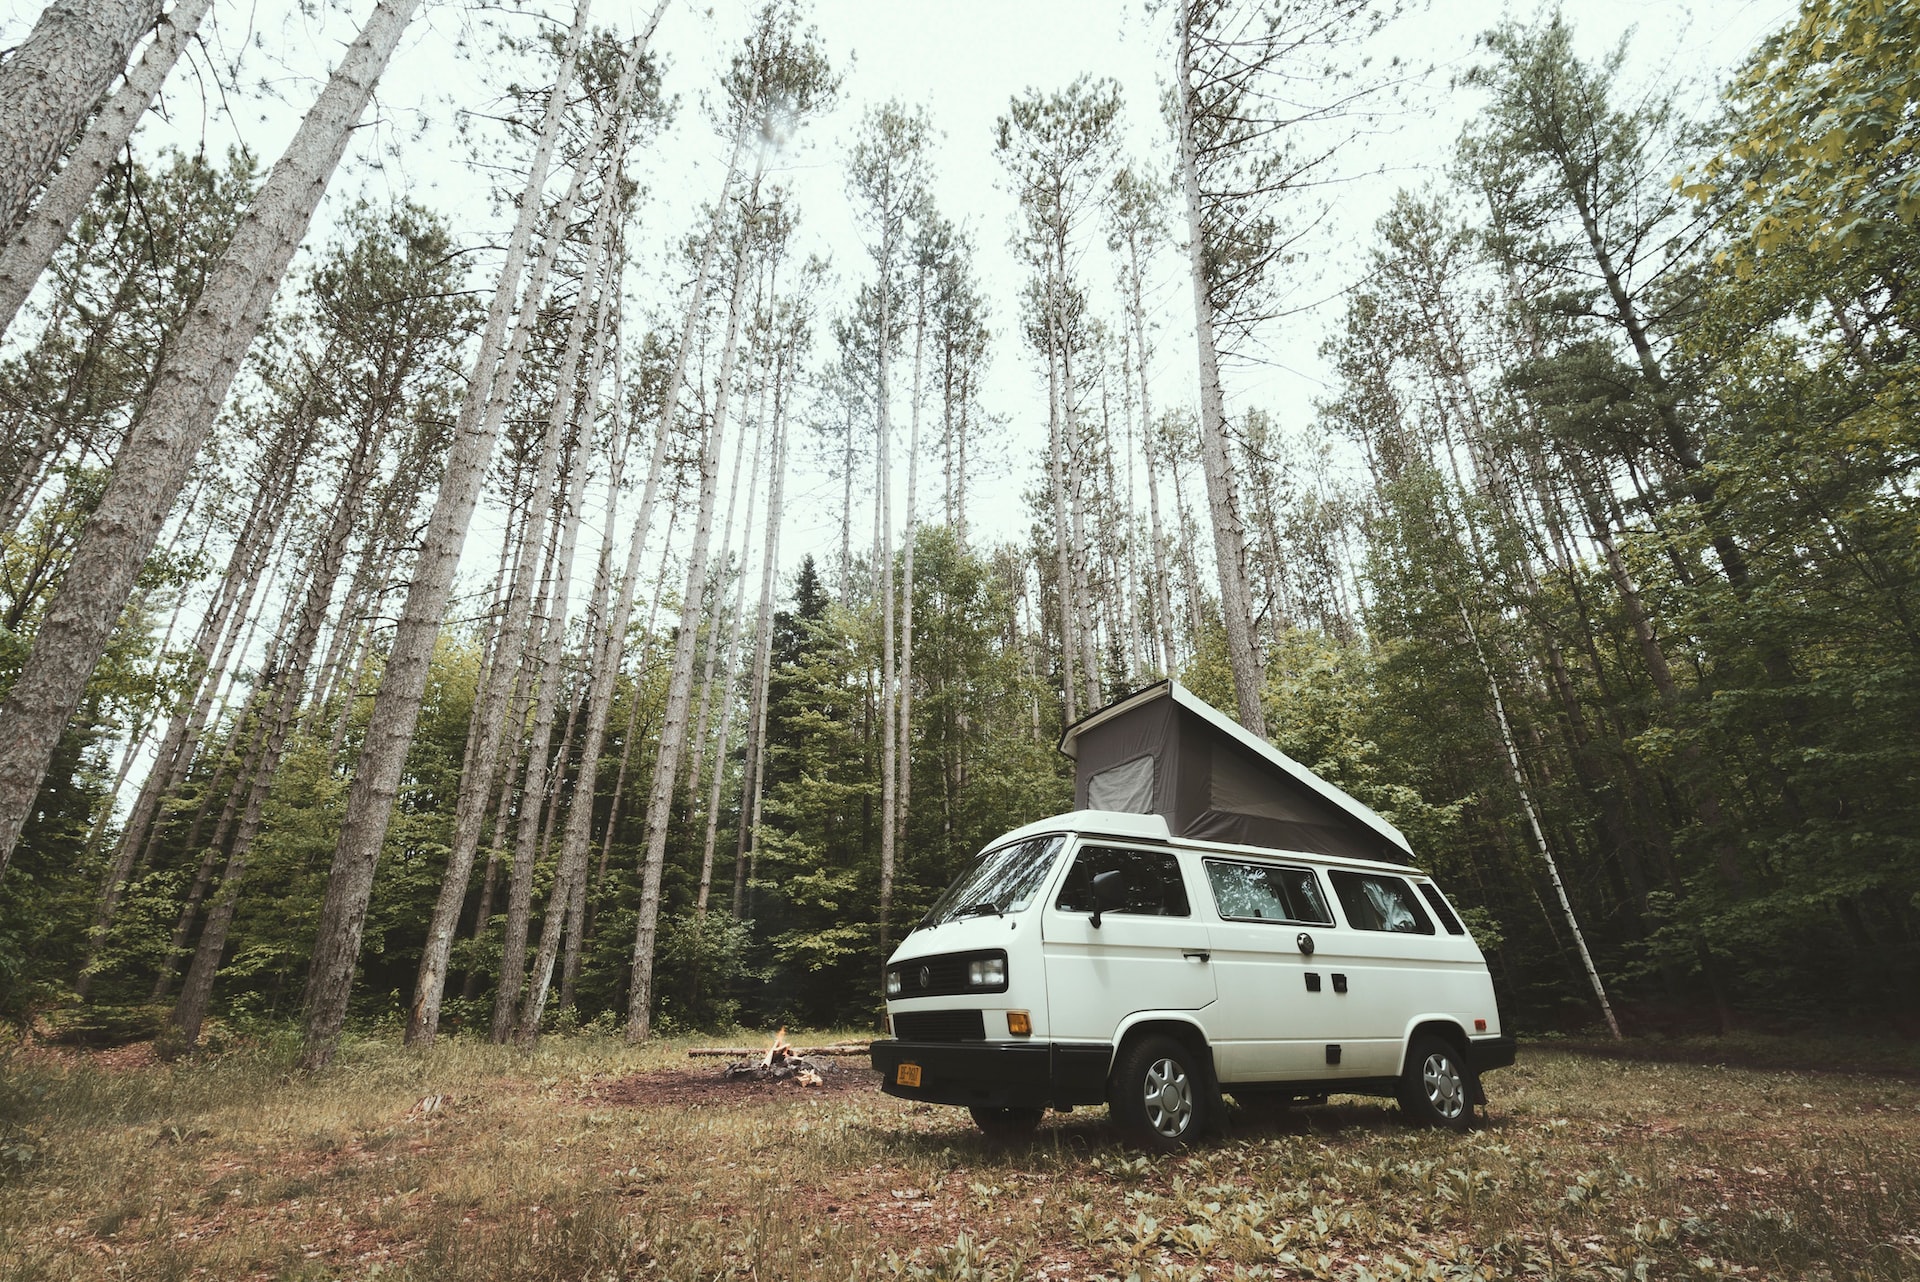 A camper van surrounded by tall pine trees in the Adirondack Mountains.